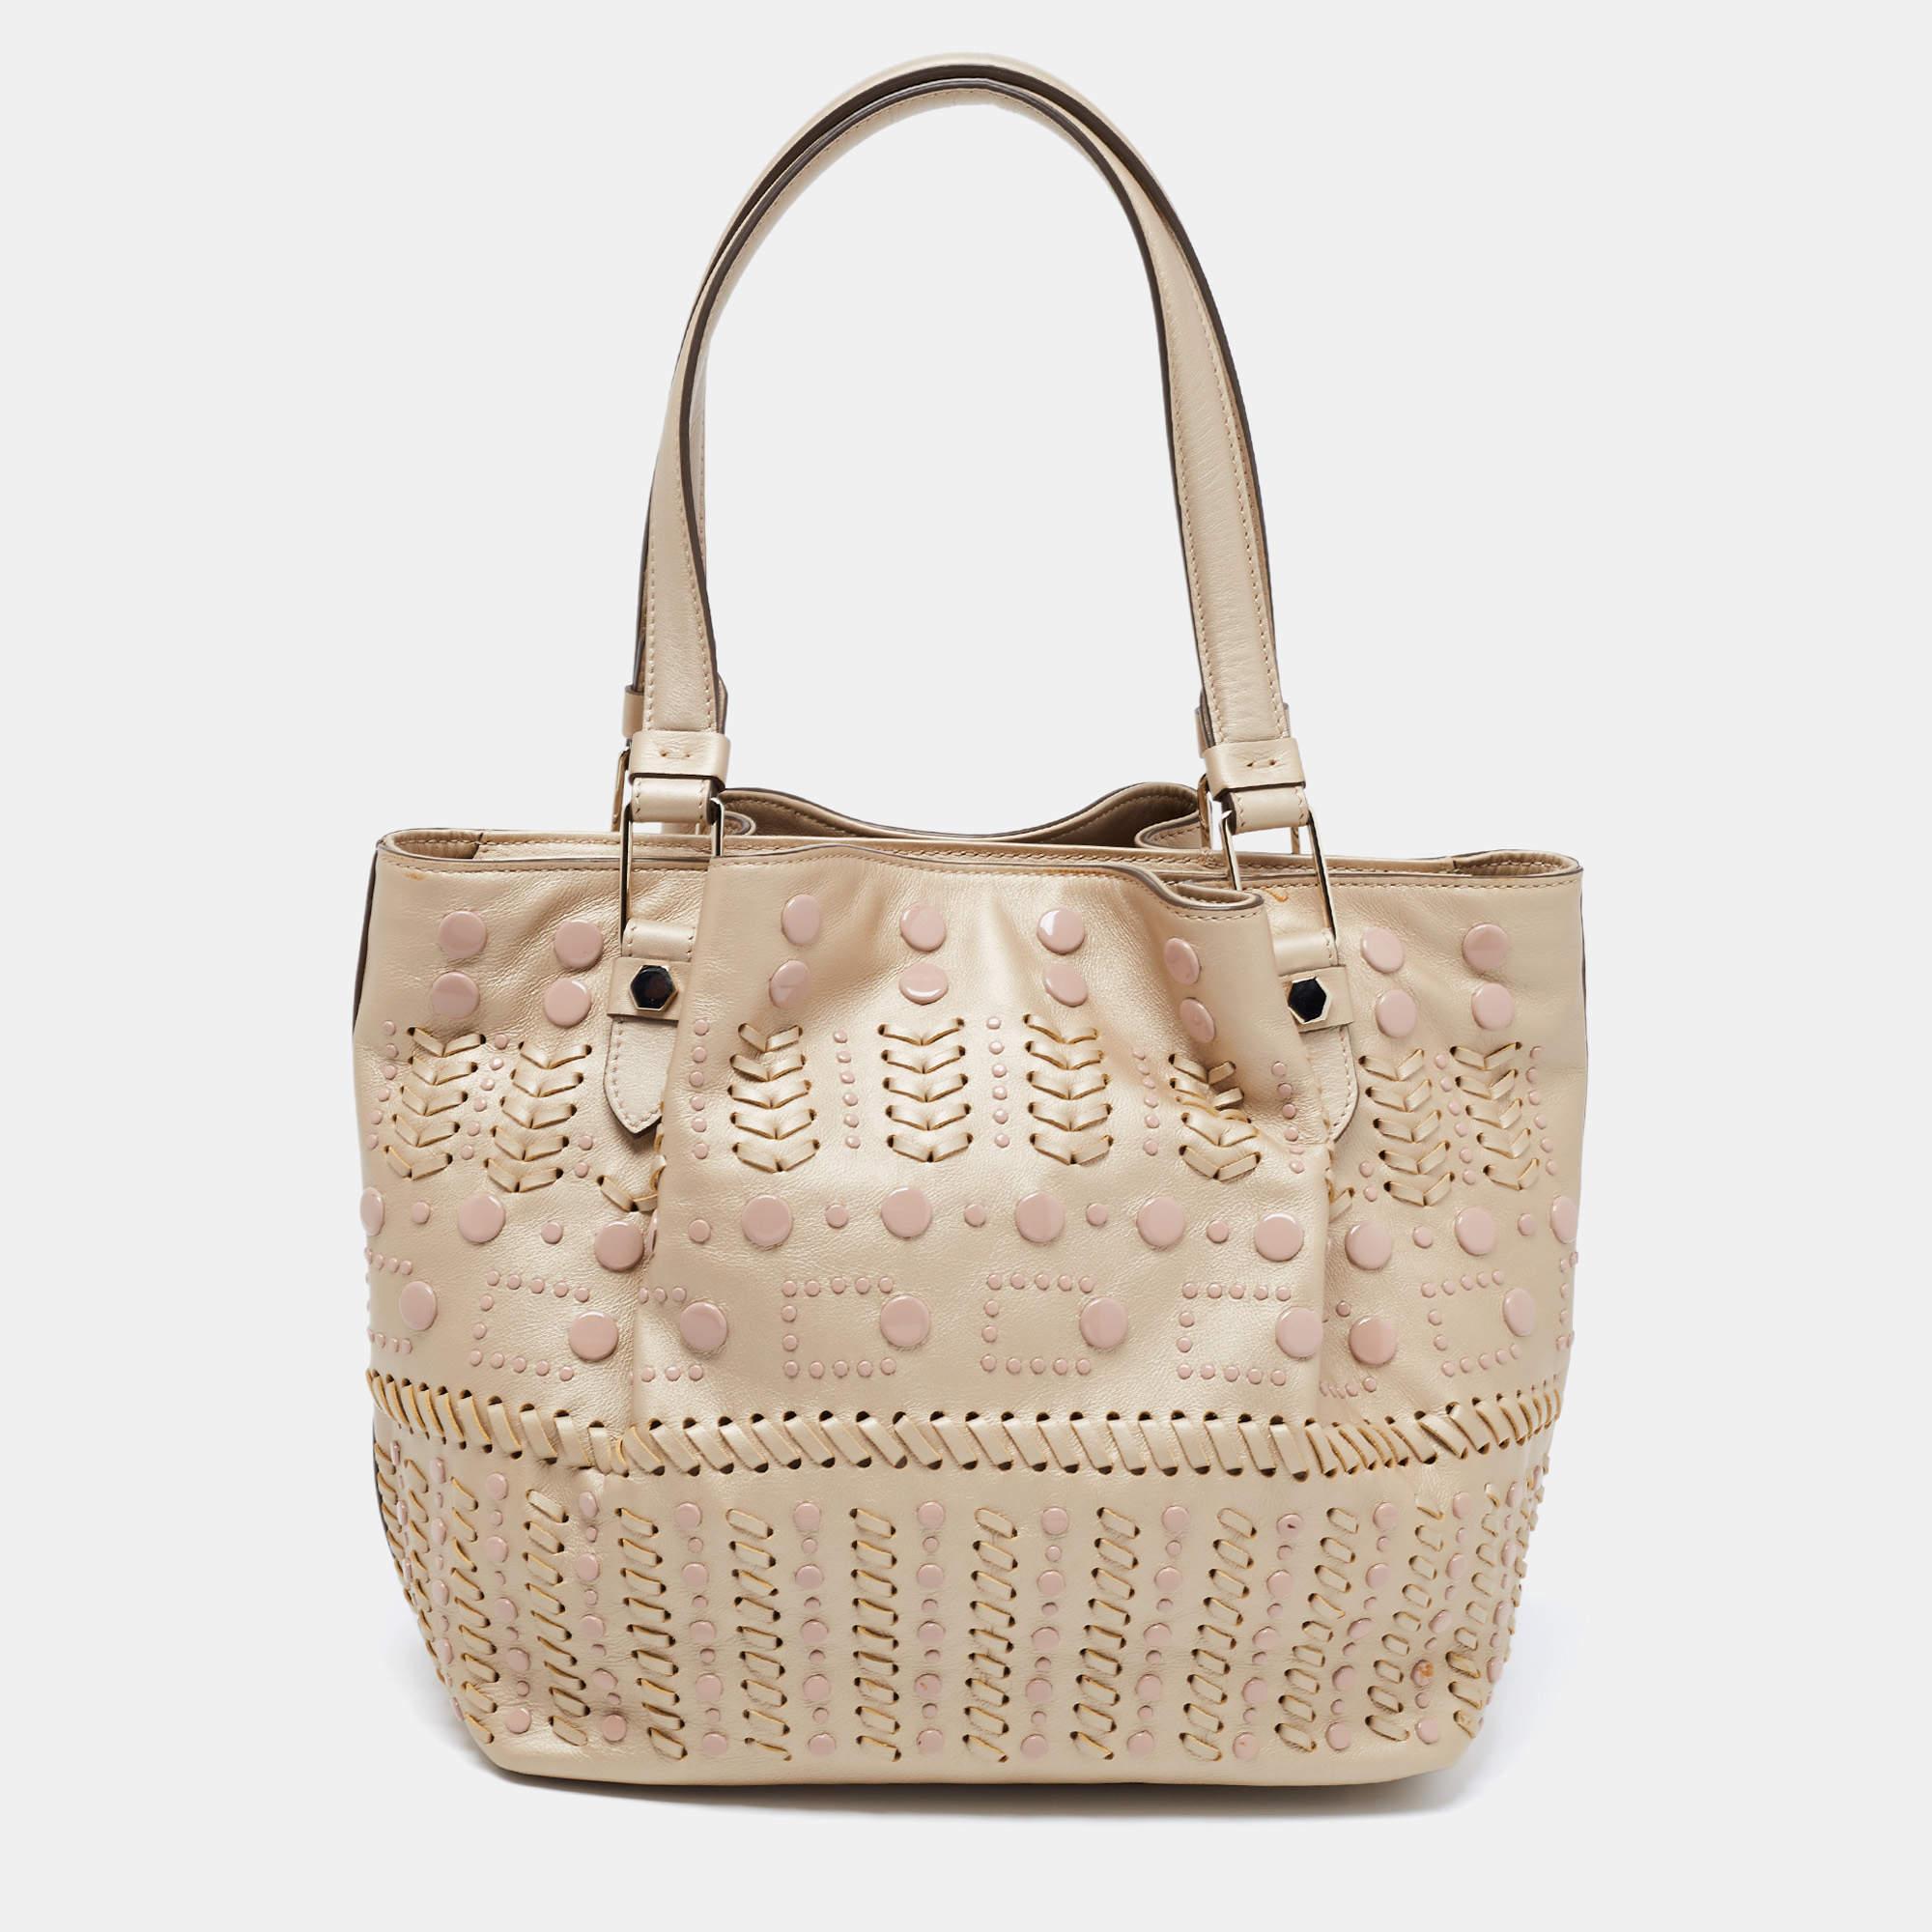 Tod's delivers a beautifully-made tote in beige leather to assist you to lunch or shopping. This lovely tote is decorated with studs and sized spaciously for neatly housing your belongings. Two handles on top allow easy carrying options.
 
Includes: